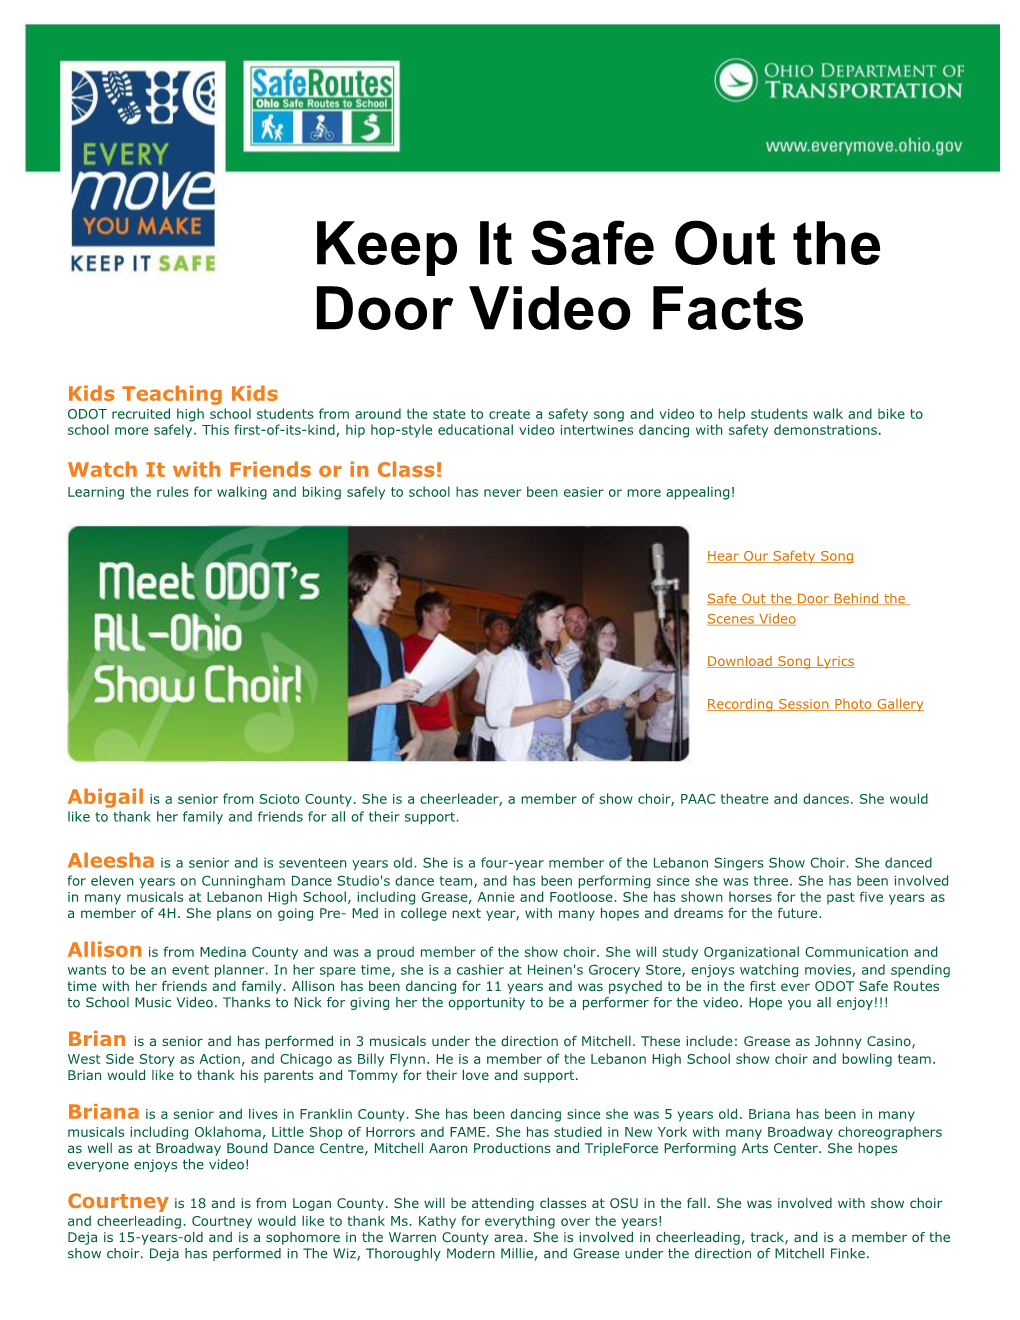 Keep It Safe out the Door Video Facts